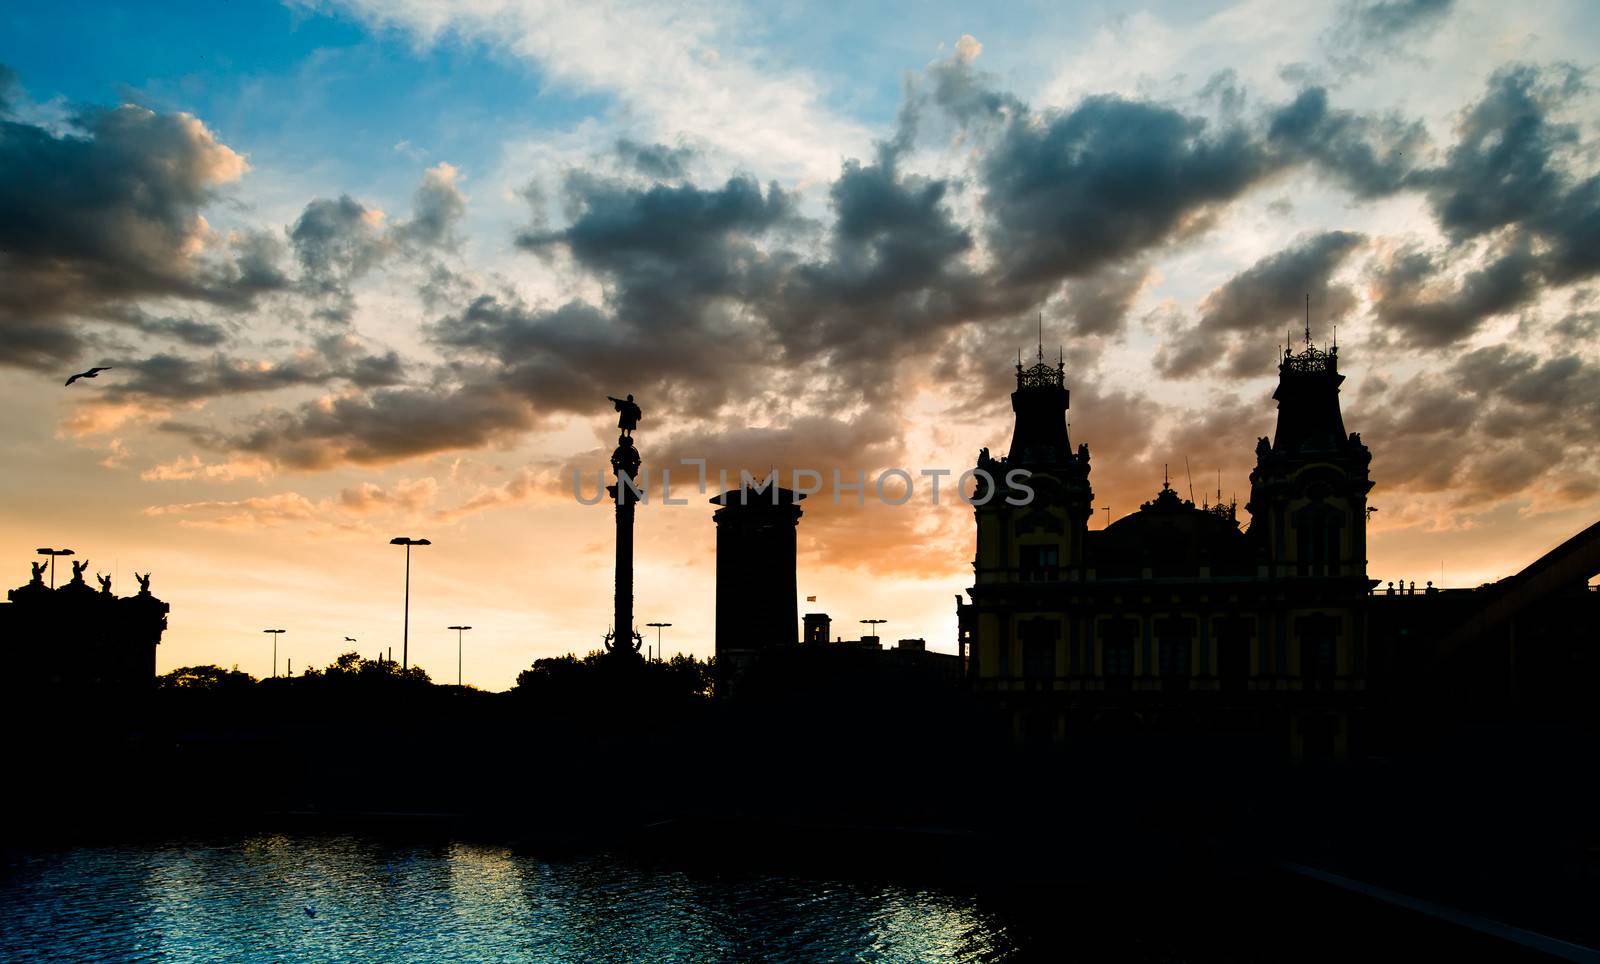 Sights of Barcelona against the evening sky